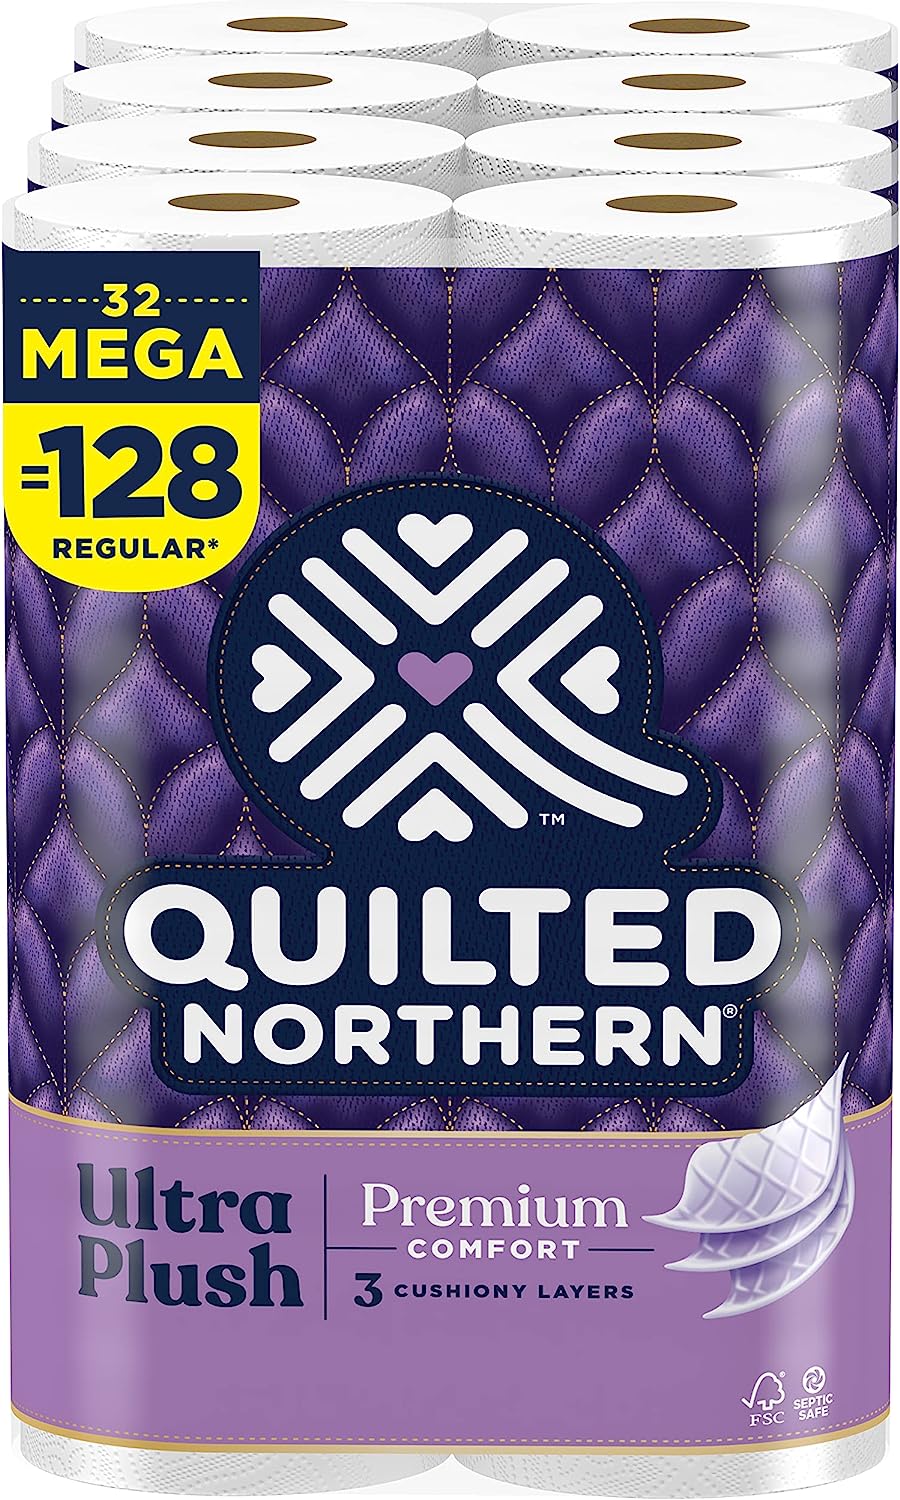 Quilted Northern Ultra Plush Toilet Paper, 32 Mega [...]